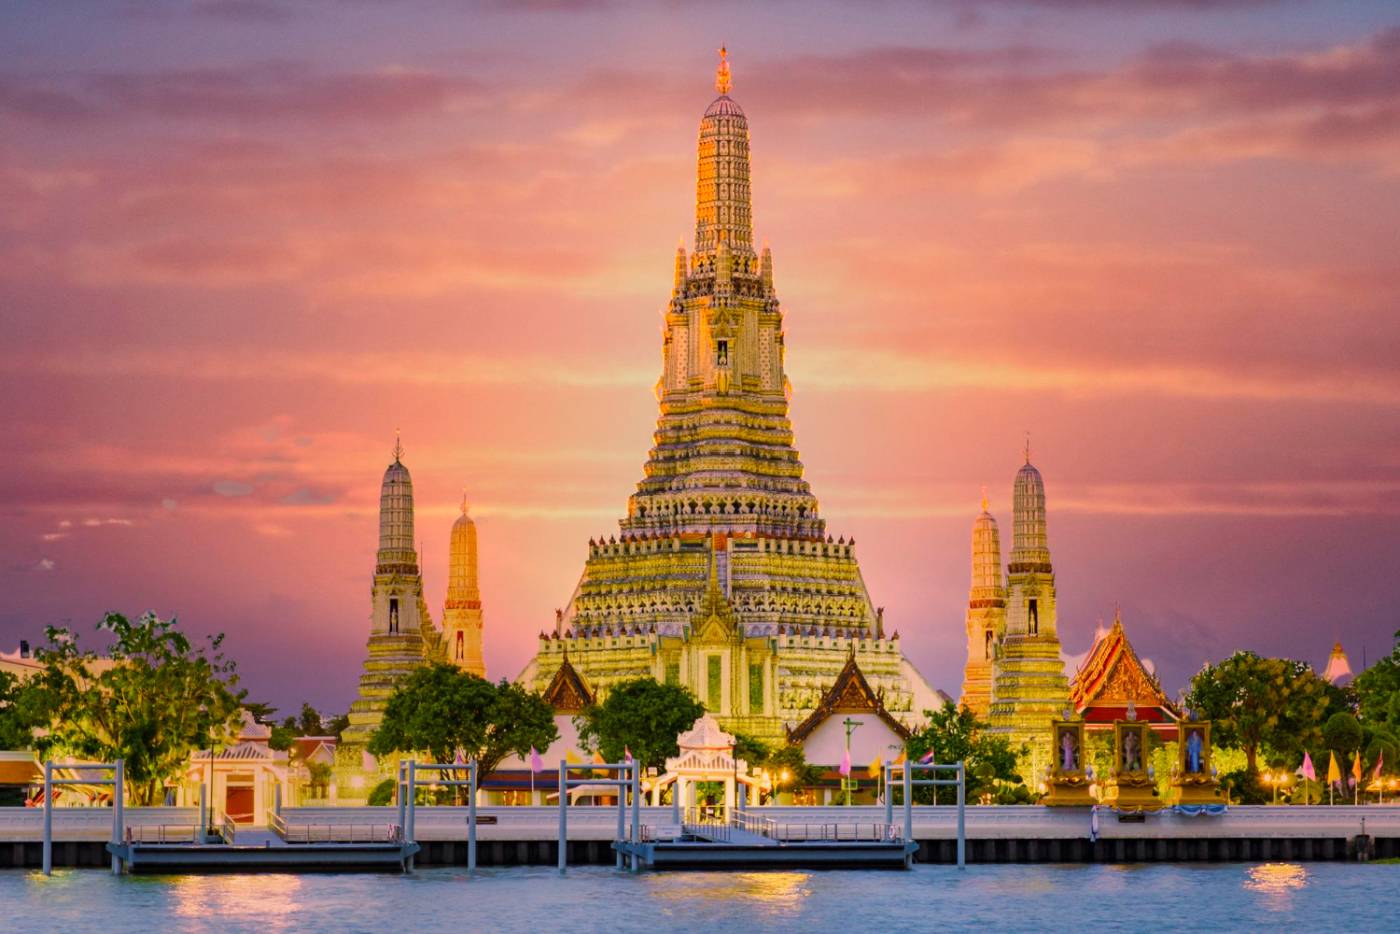 Wat Arun Temple at dawn, a Buddhist temple situated along the Chao Phraya River in Bangkok, Thailand